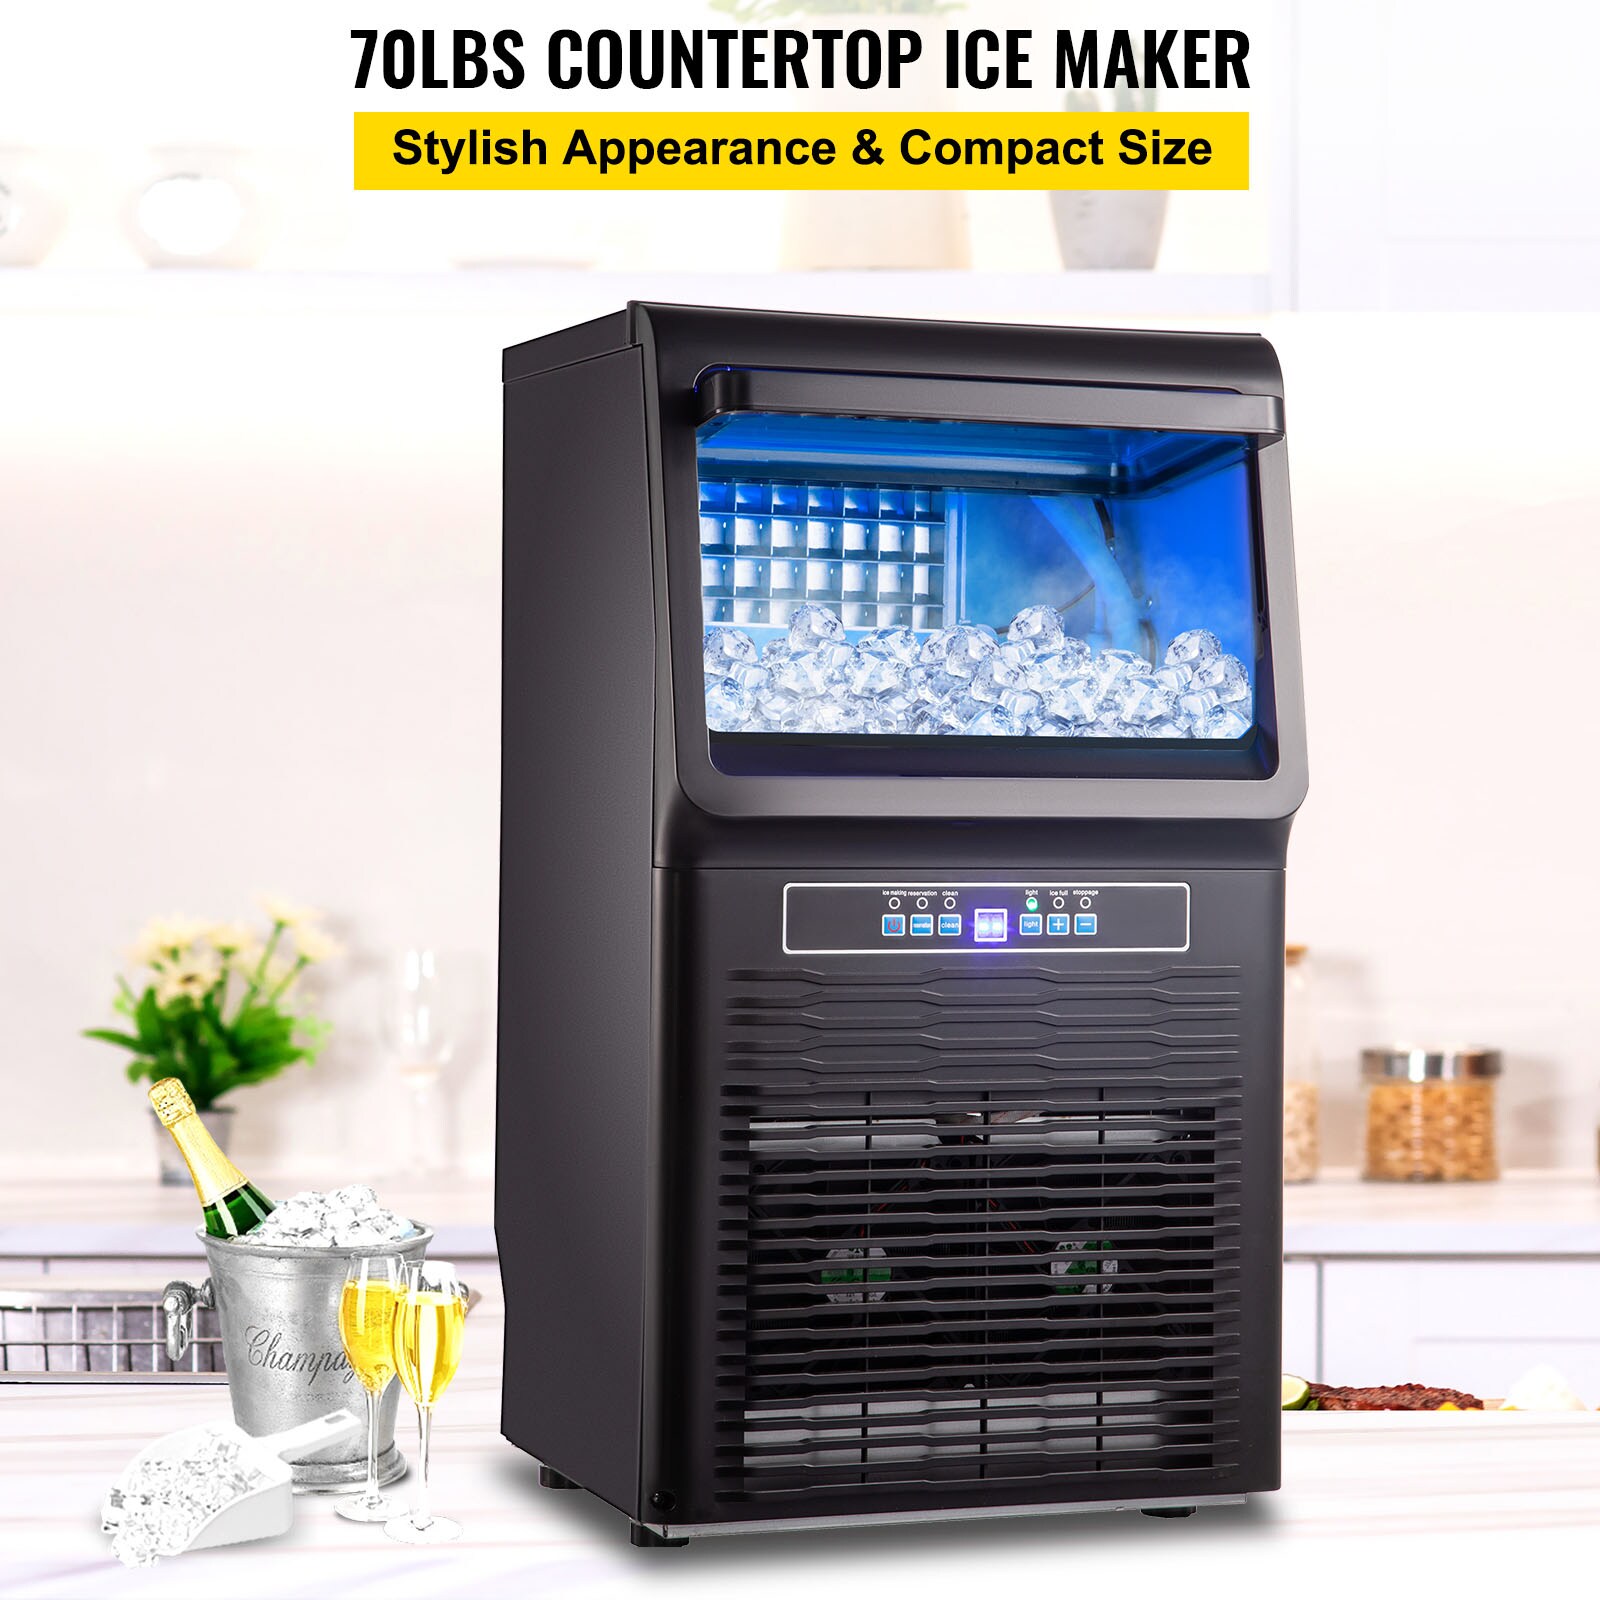 VEVOR Countertop Ice Maker 26 lb. / 24H Self-Cleaning Portable Ice